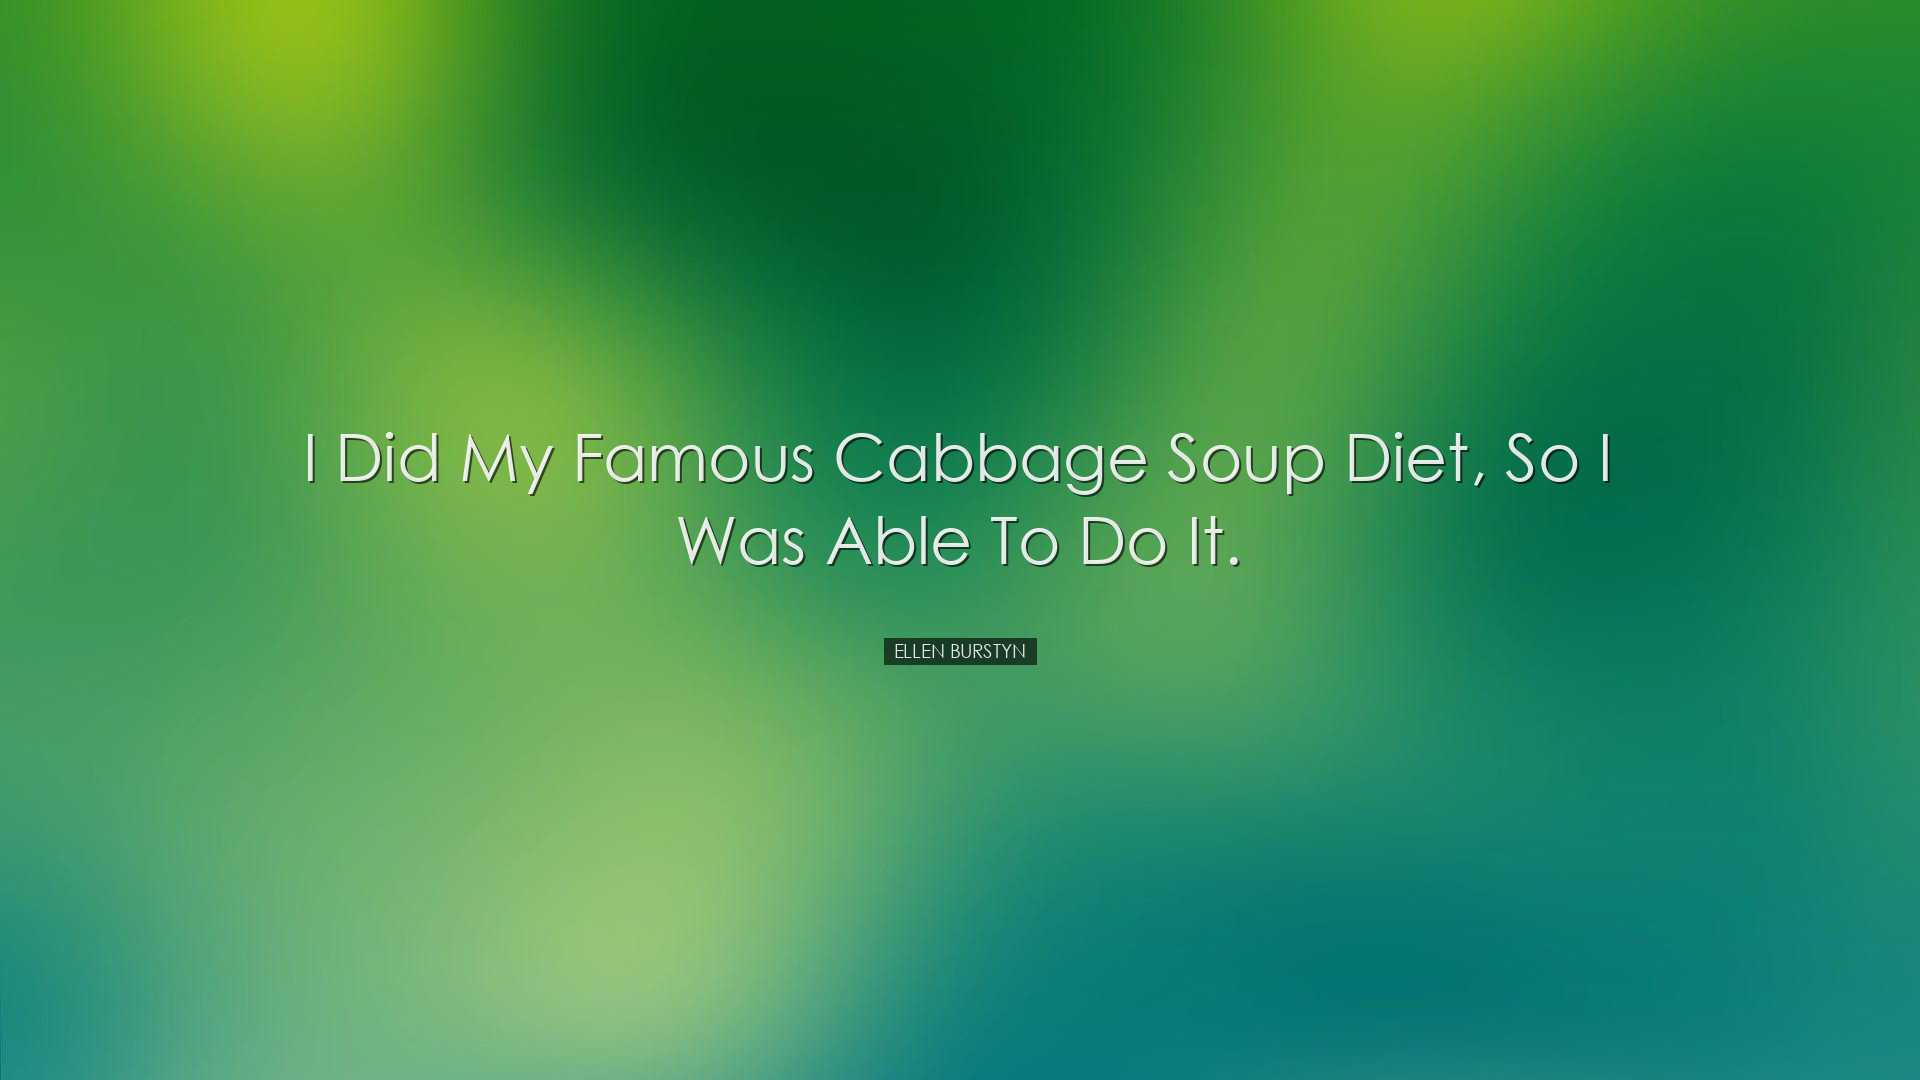 I did my famous cabbage soup diet, so I was able to do it. - Ellen